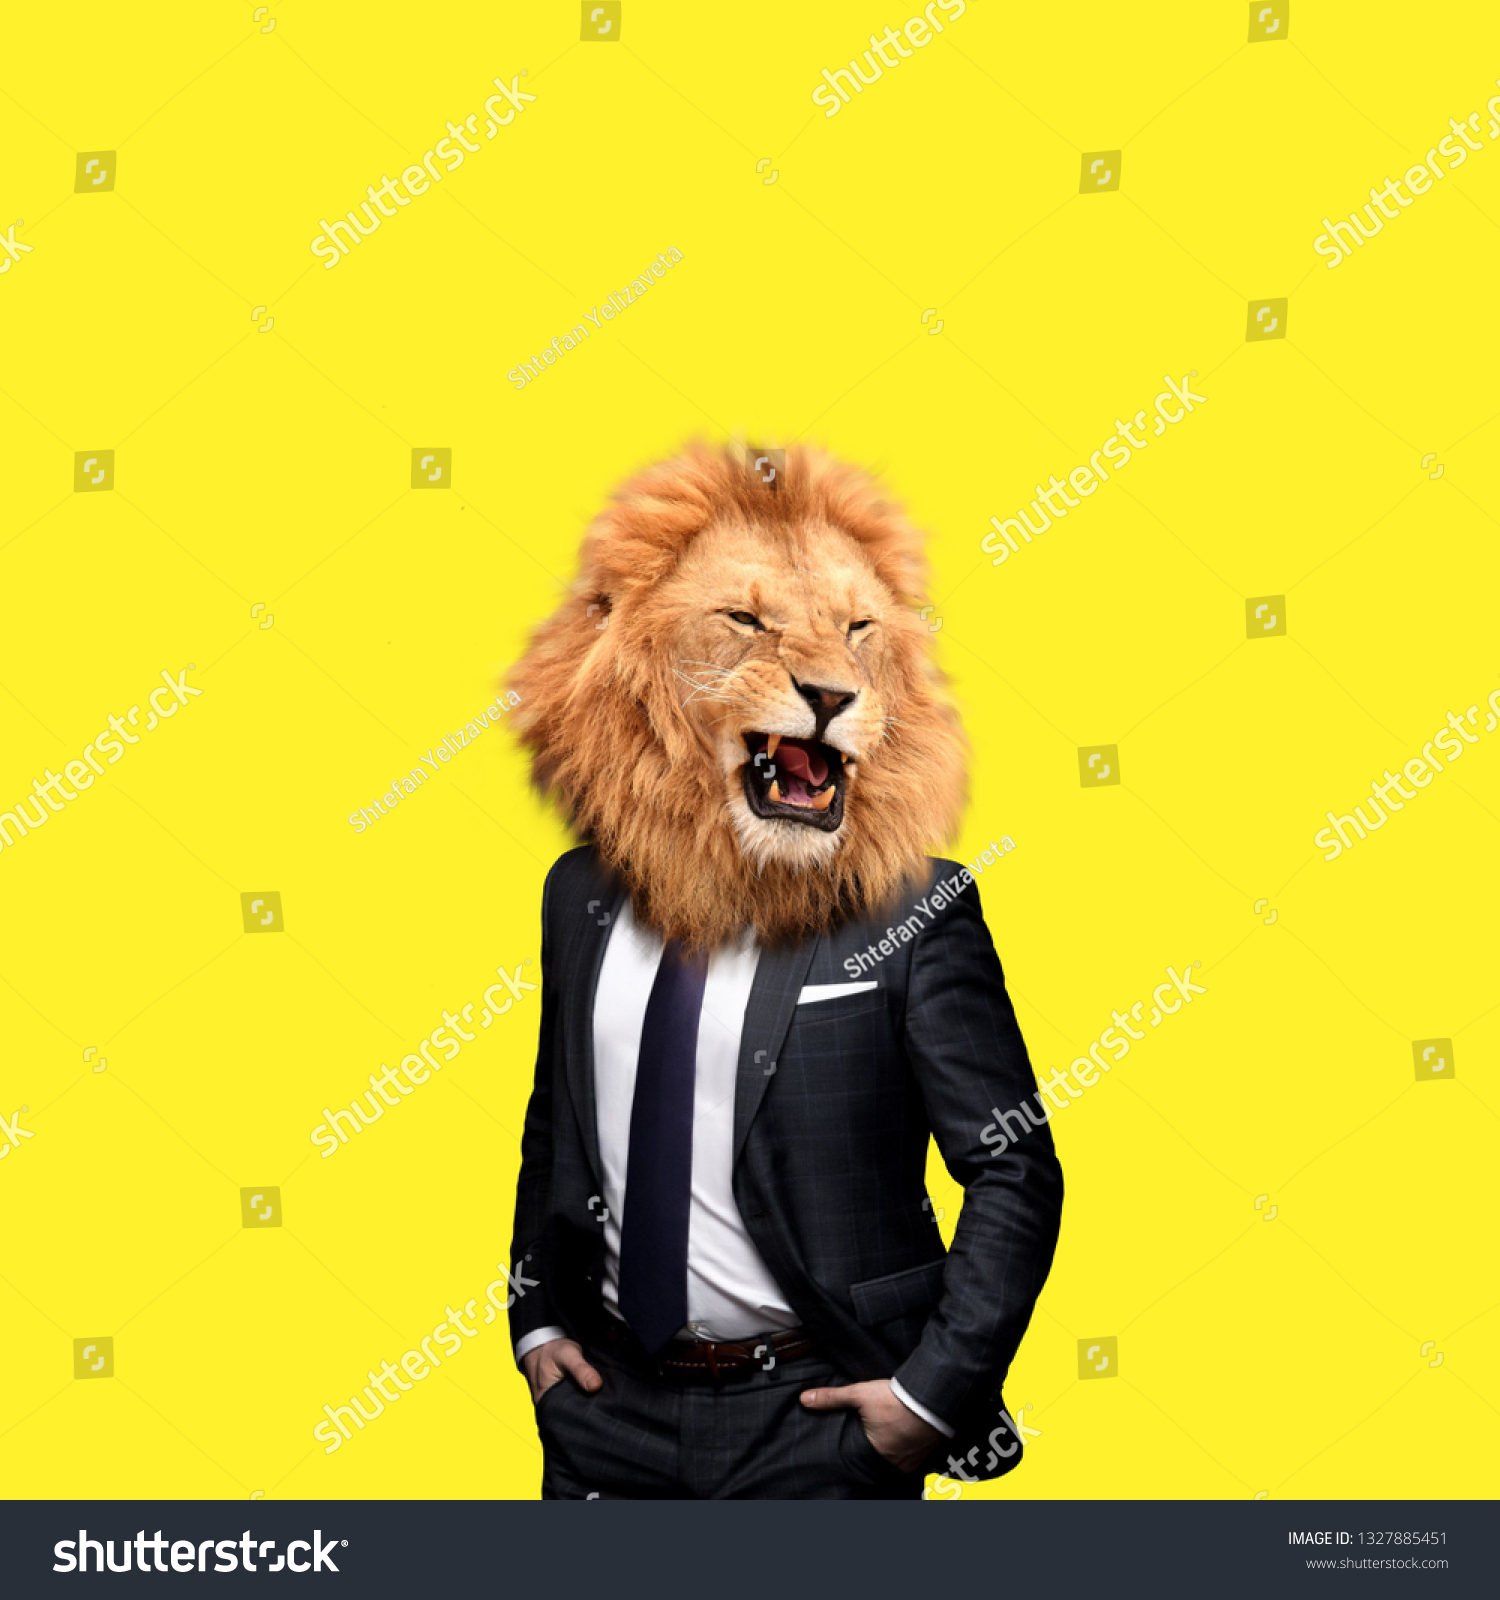 Contemporary art college, man in the form of a lion
 #1327885451